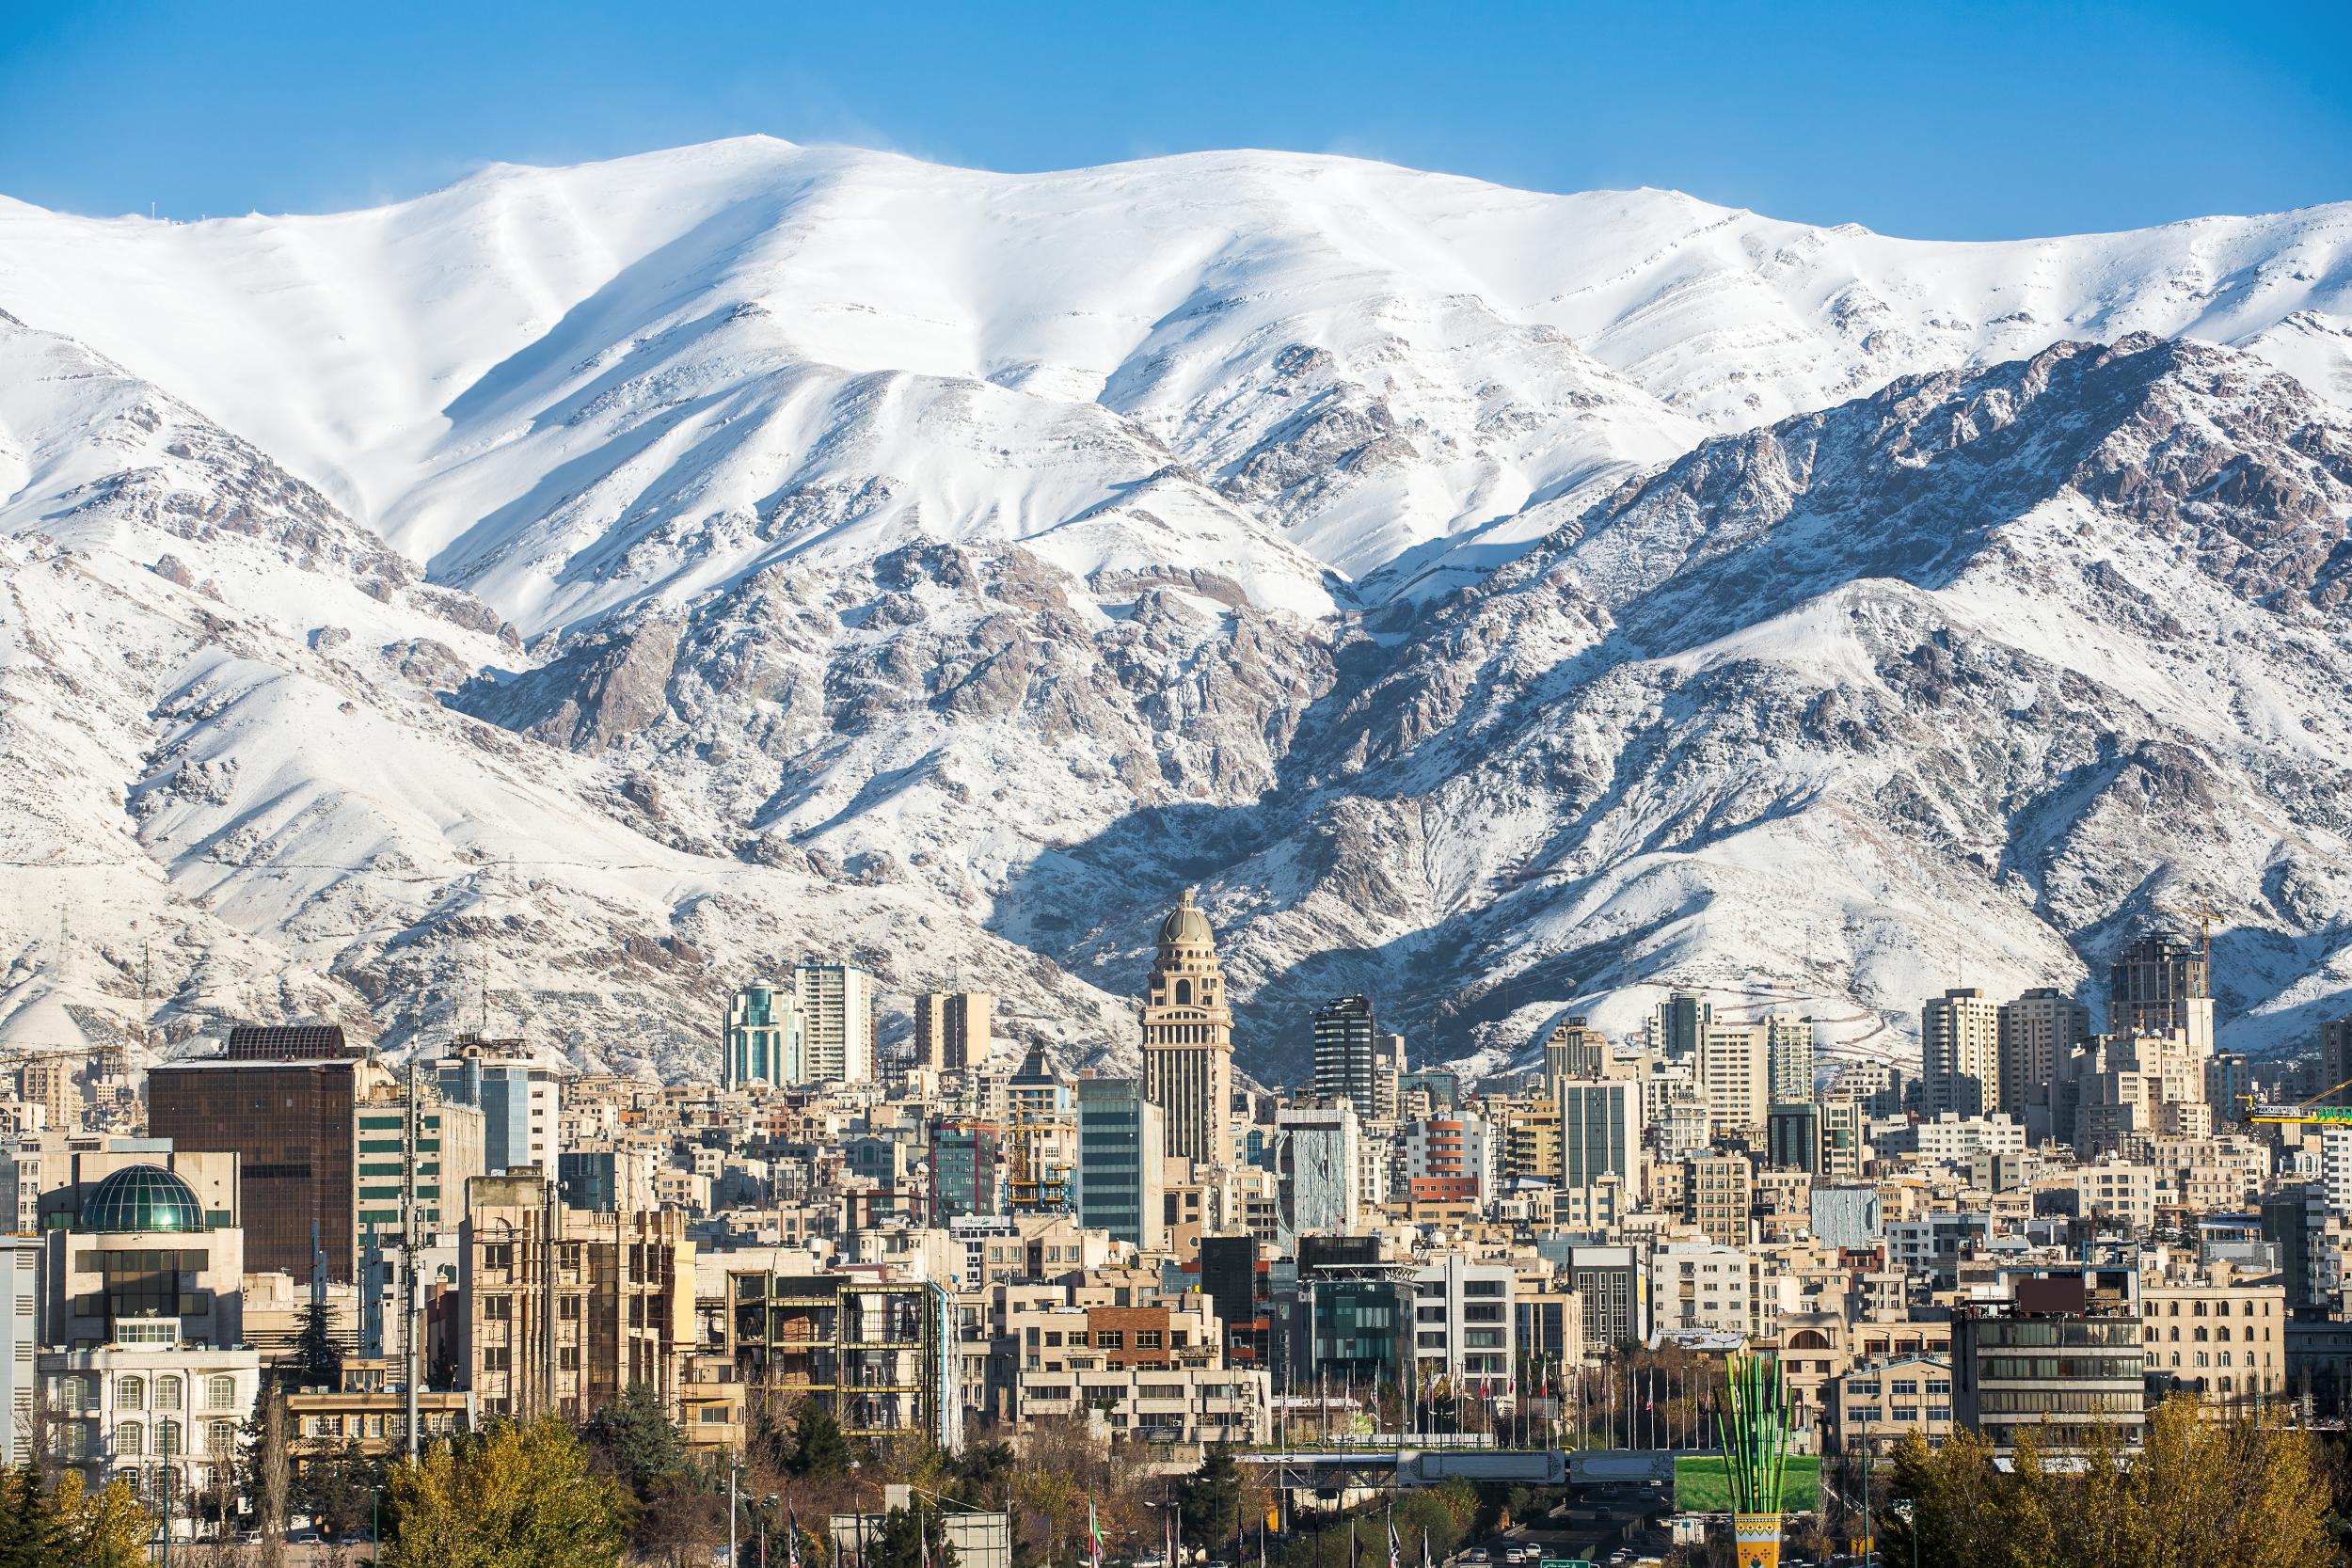 Tehran's skyline in winter - when not obscured by heavy pollution from its traffic-choked roads